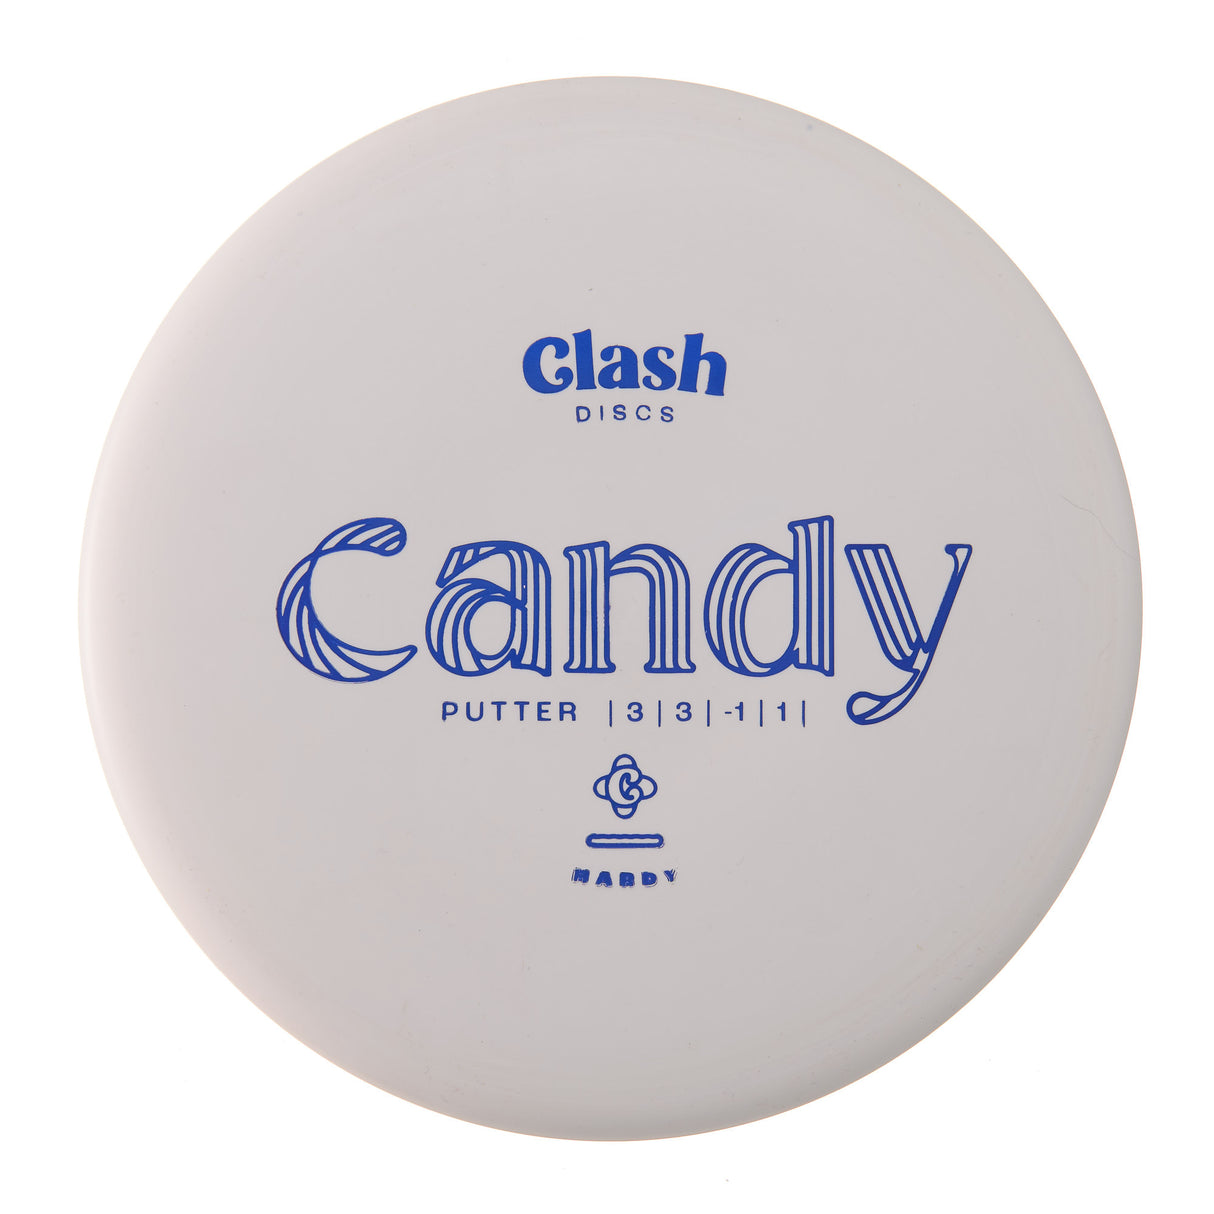 Clash Discs Candy - Hardy 172g | Style 0001